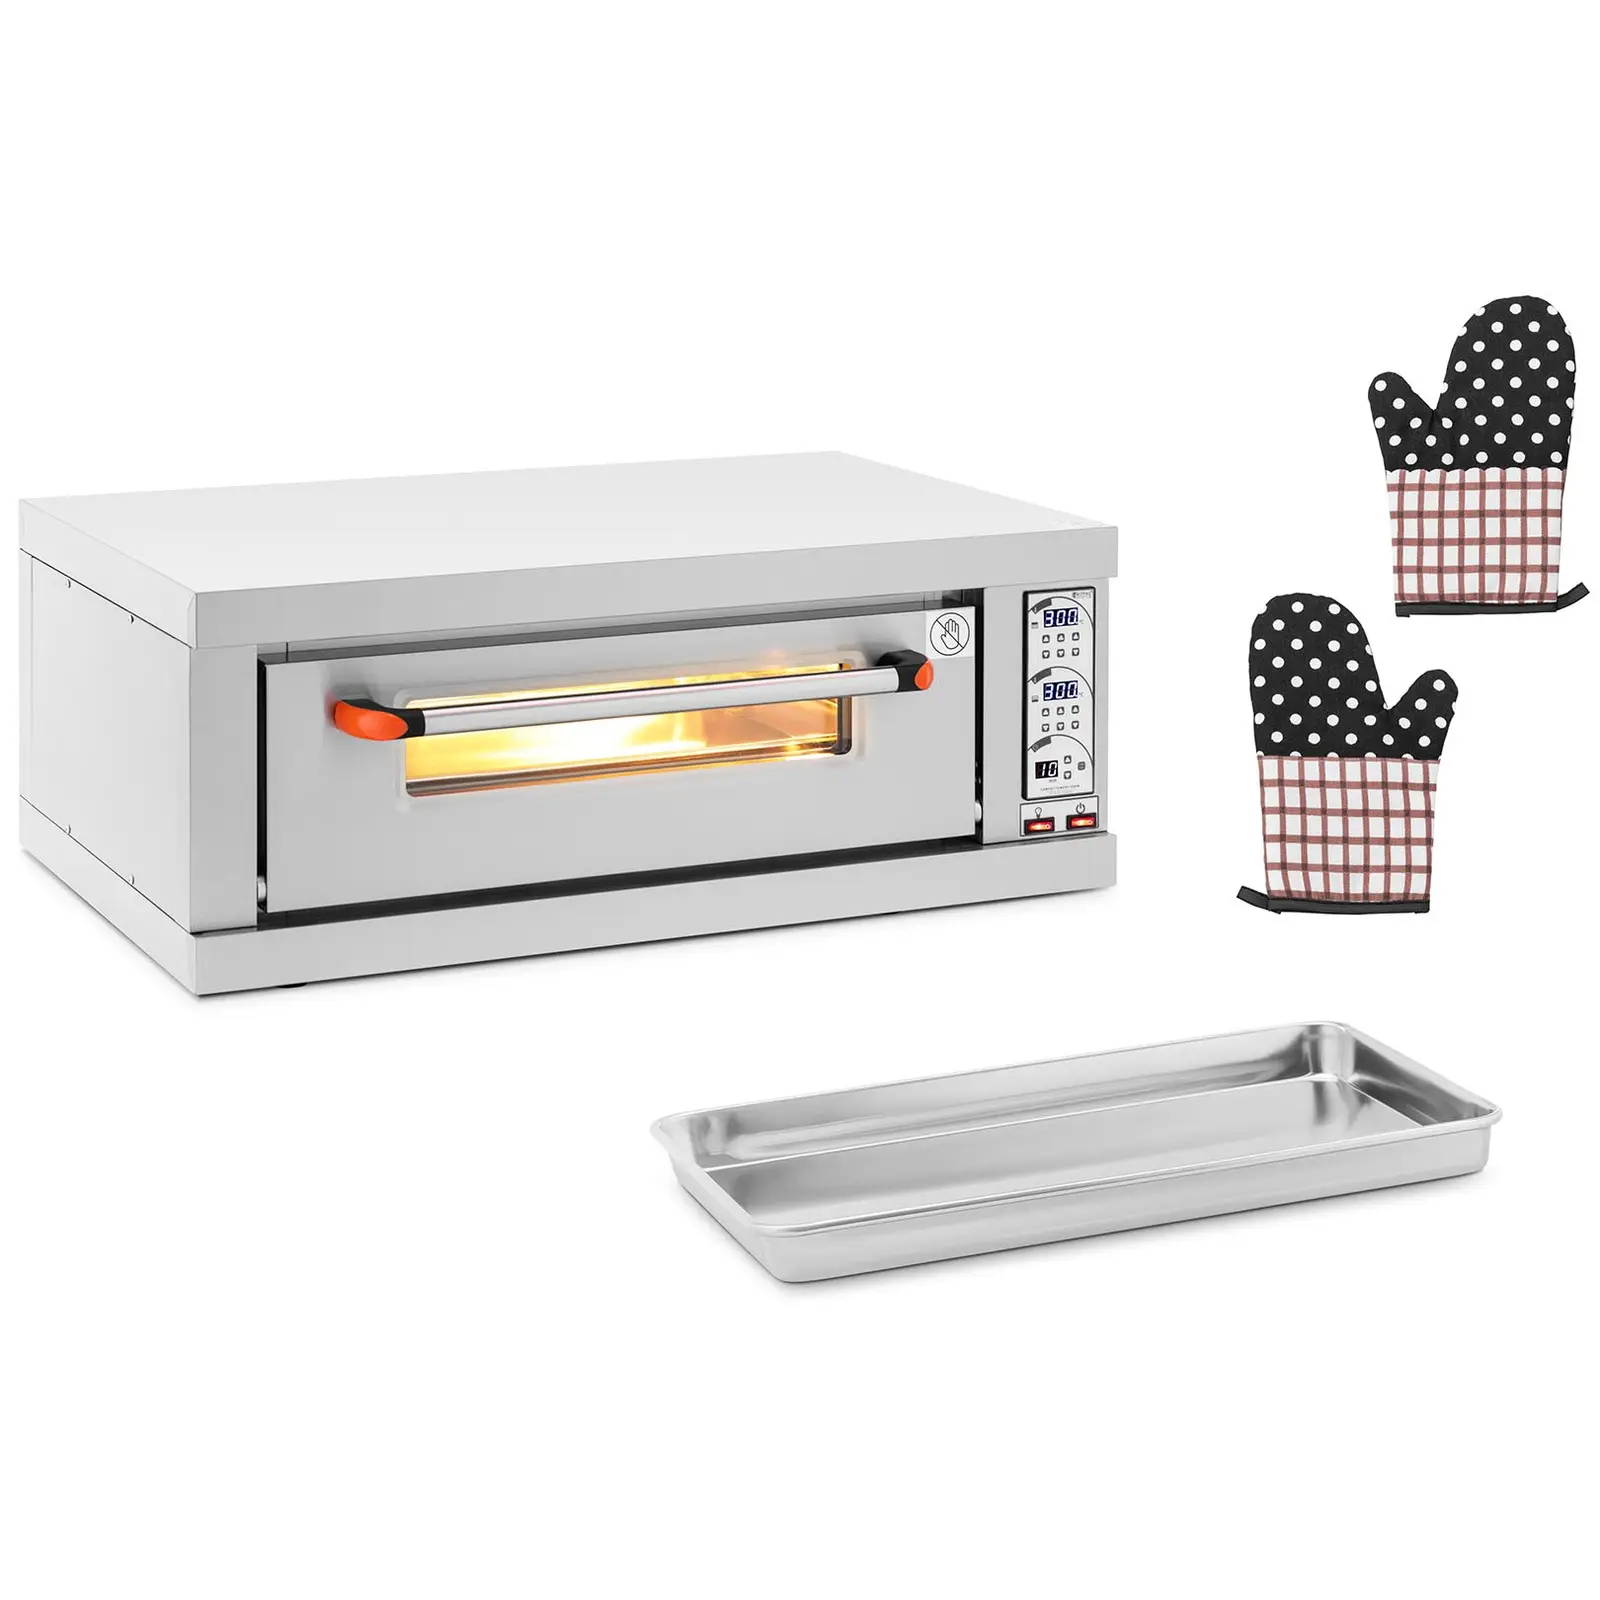 Pizza oven - 1 chamber - 3200 W - Timer - Royal Catering